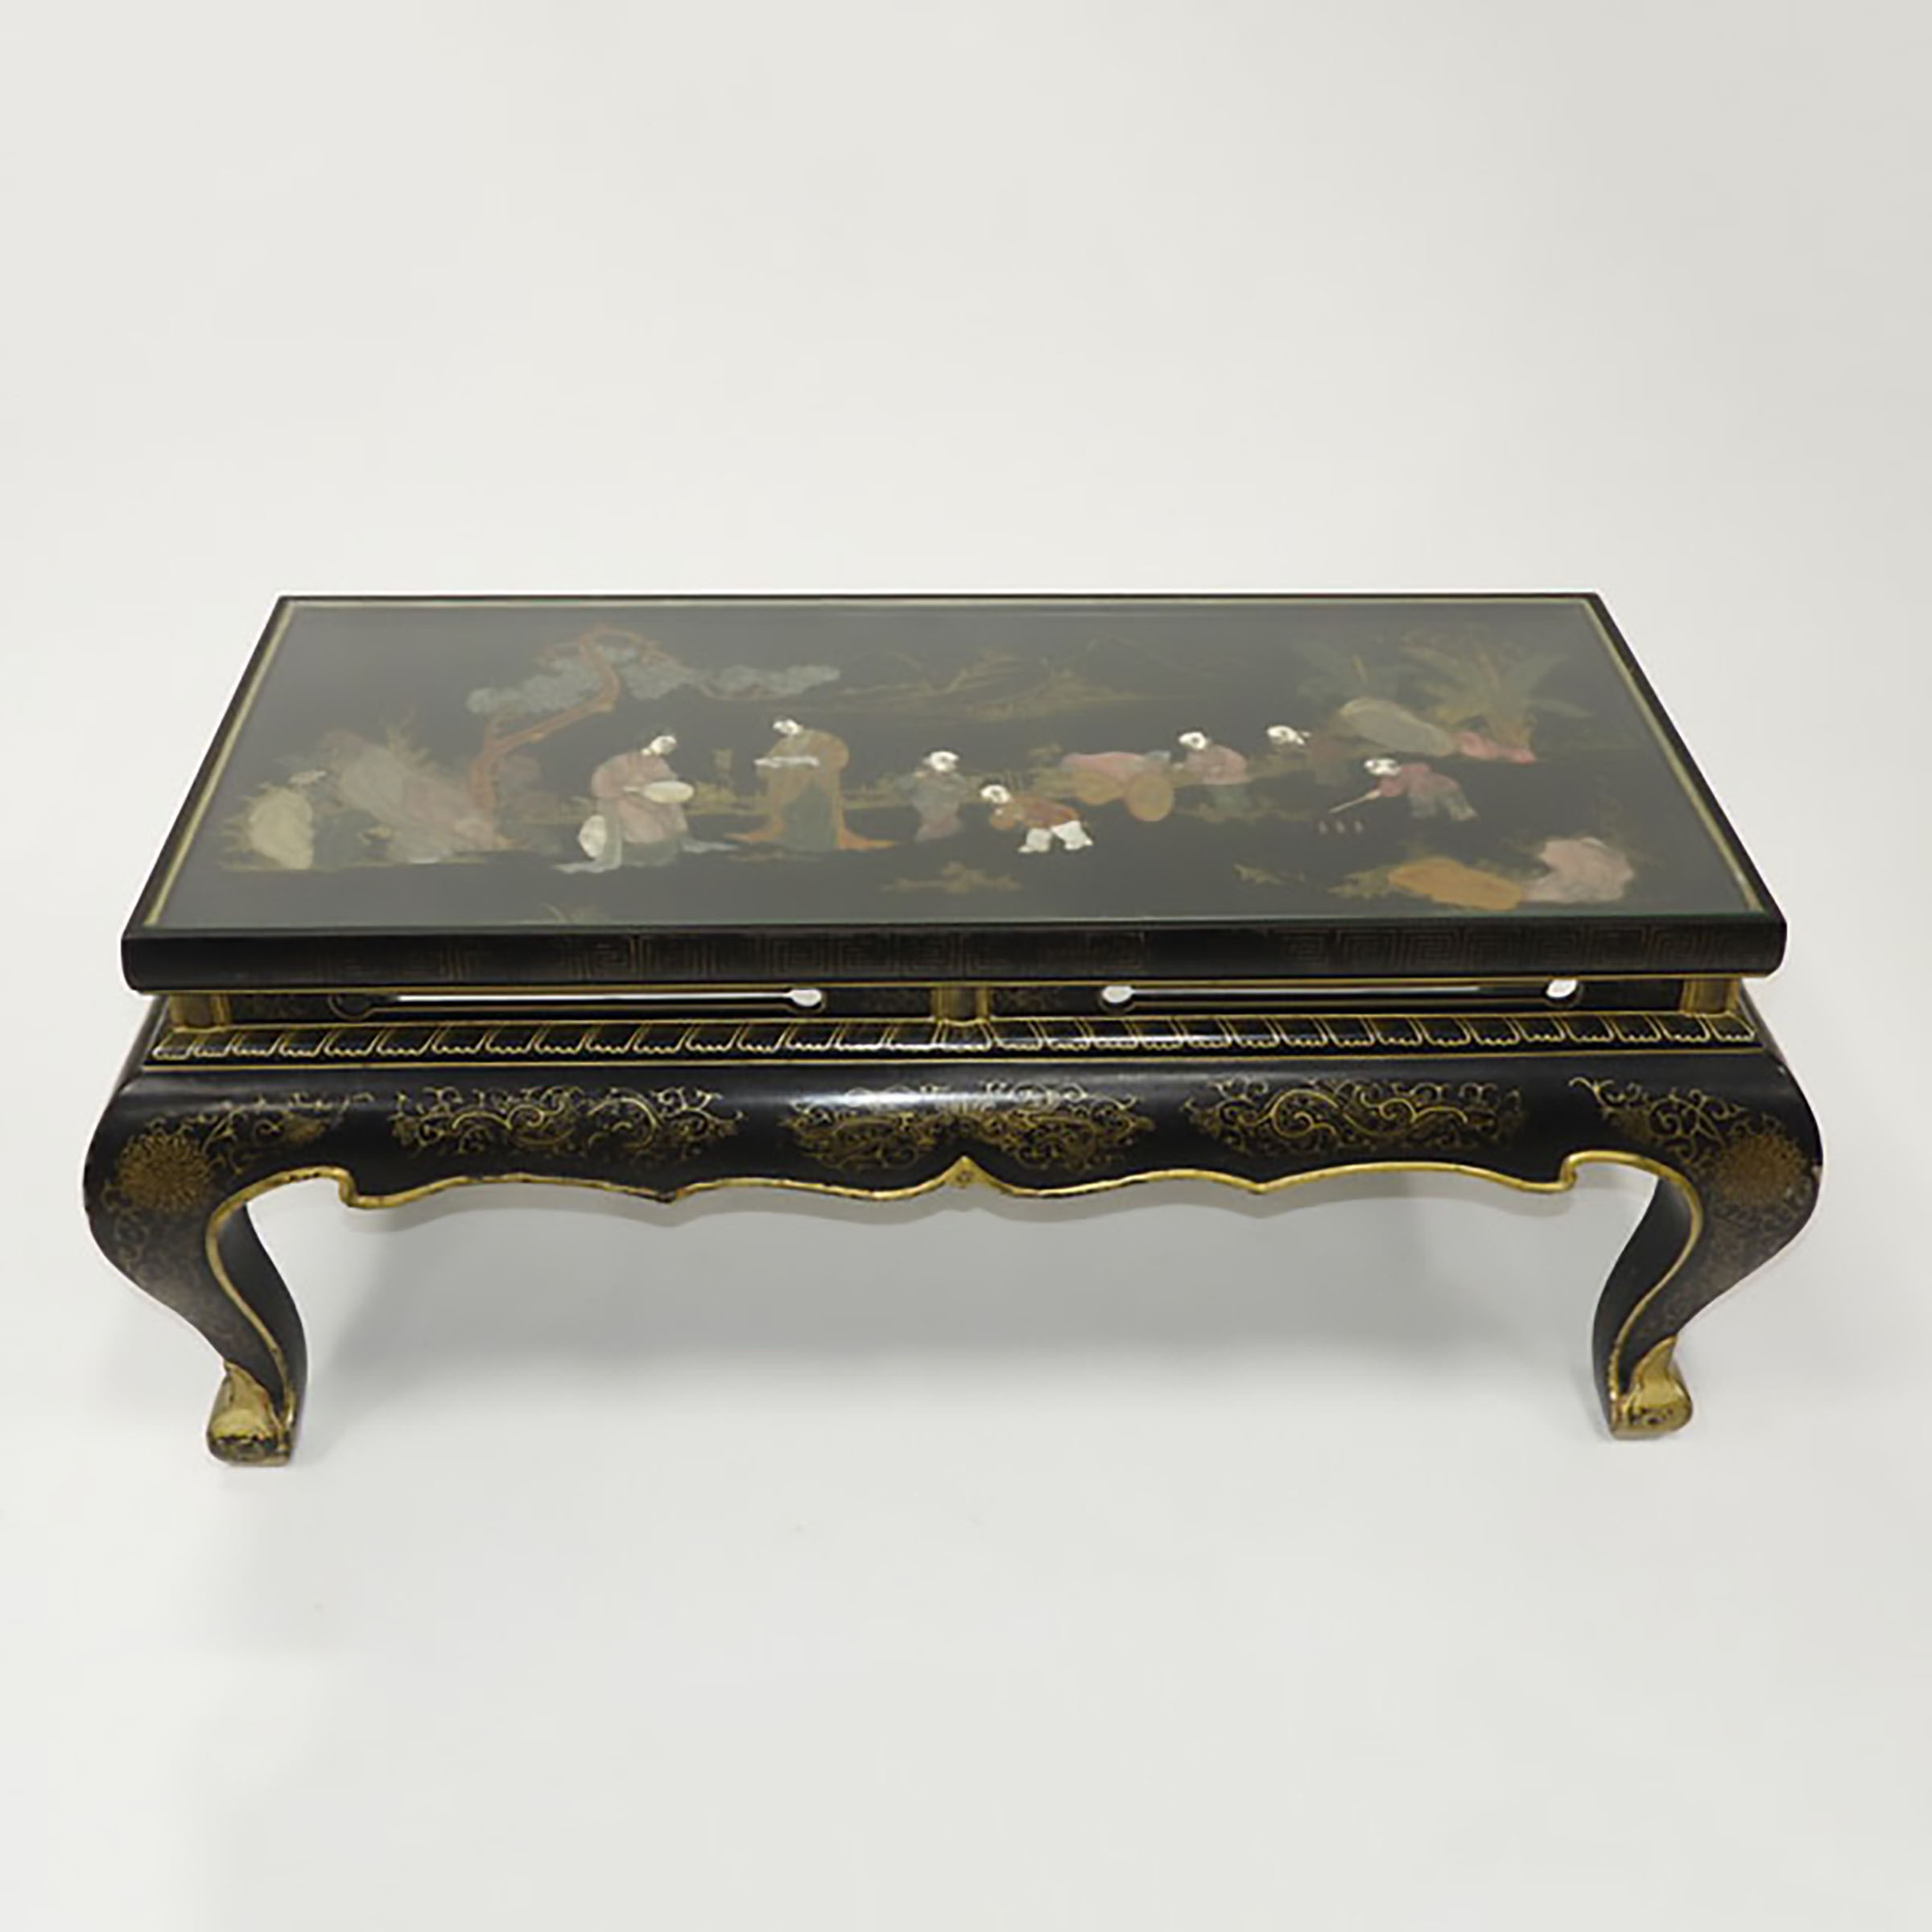 A Chinese Gilded and Lacquered Coffee Table With Glass Top, Early to Mid 20th Century